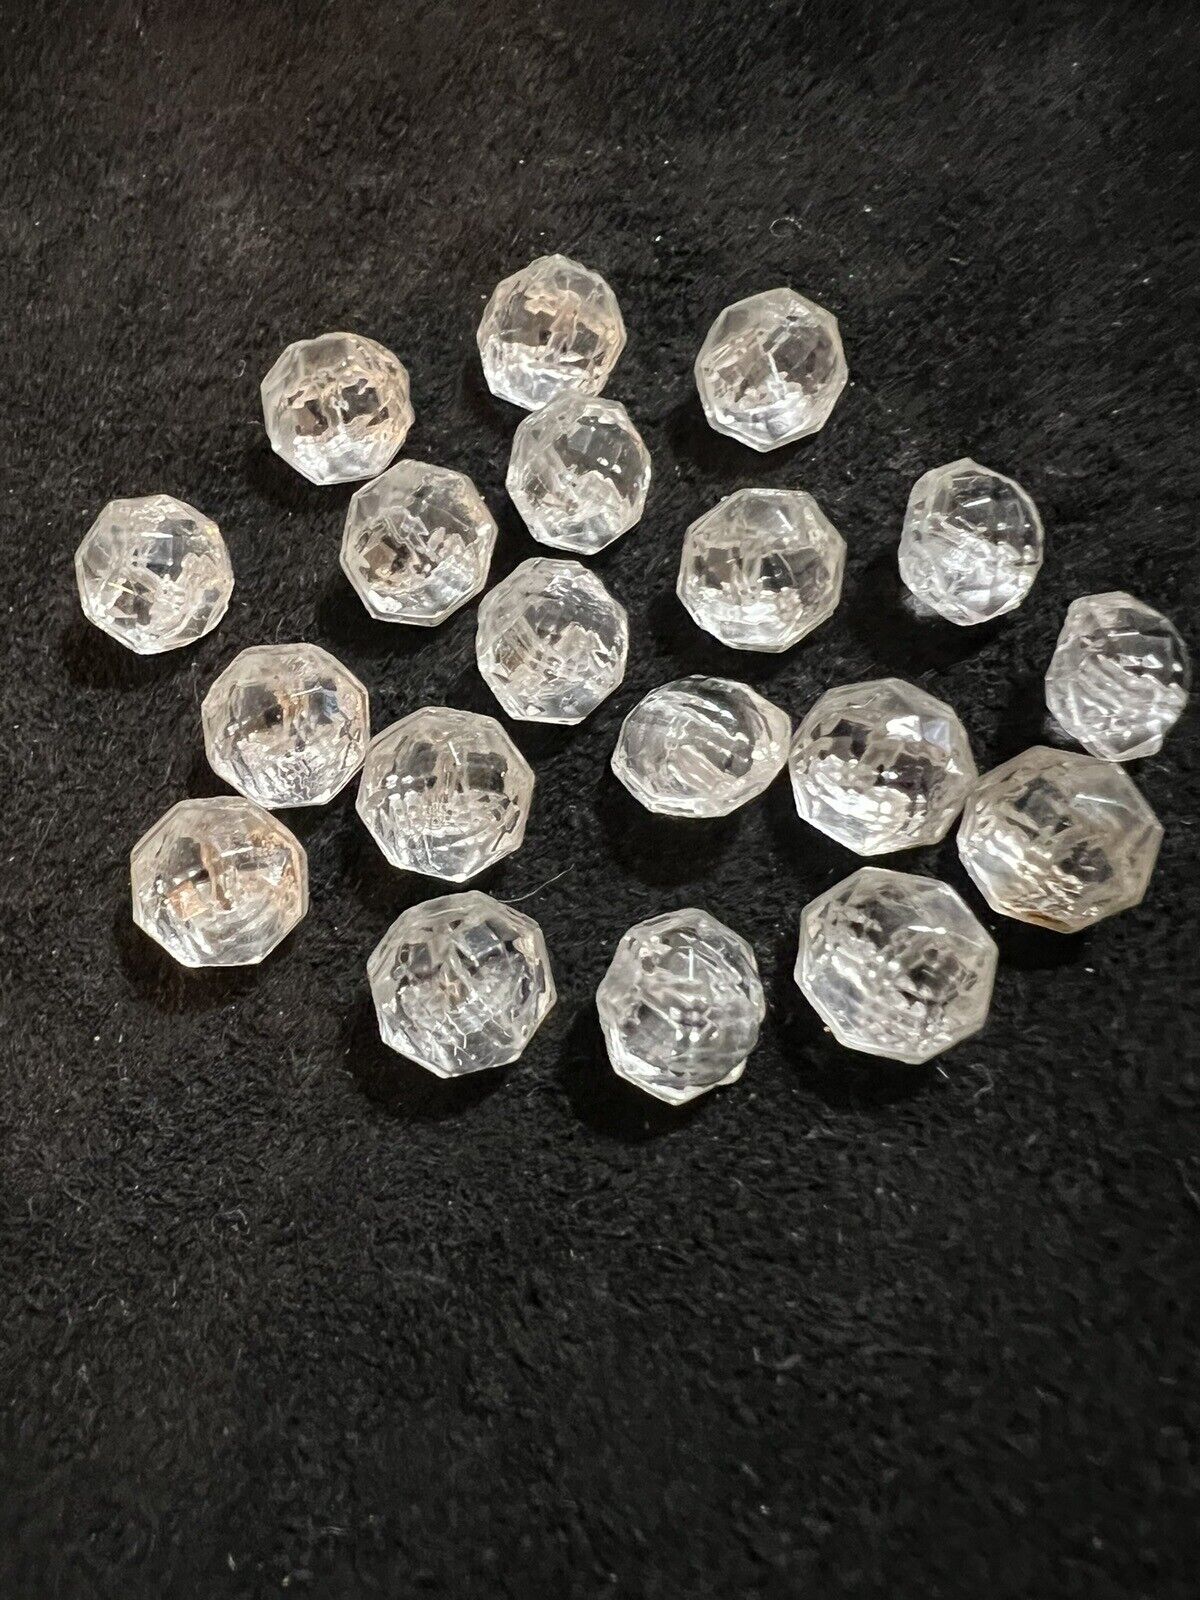 19 Antique Vintage Crystal Clear Faceted Glass Buttons 11/32”